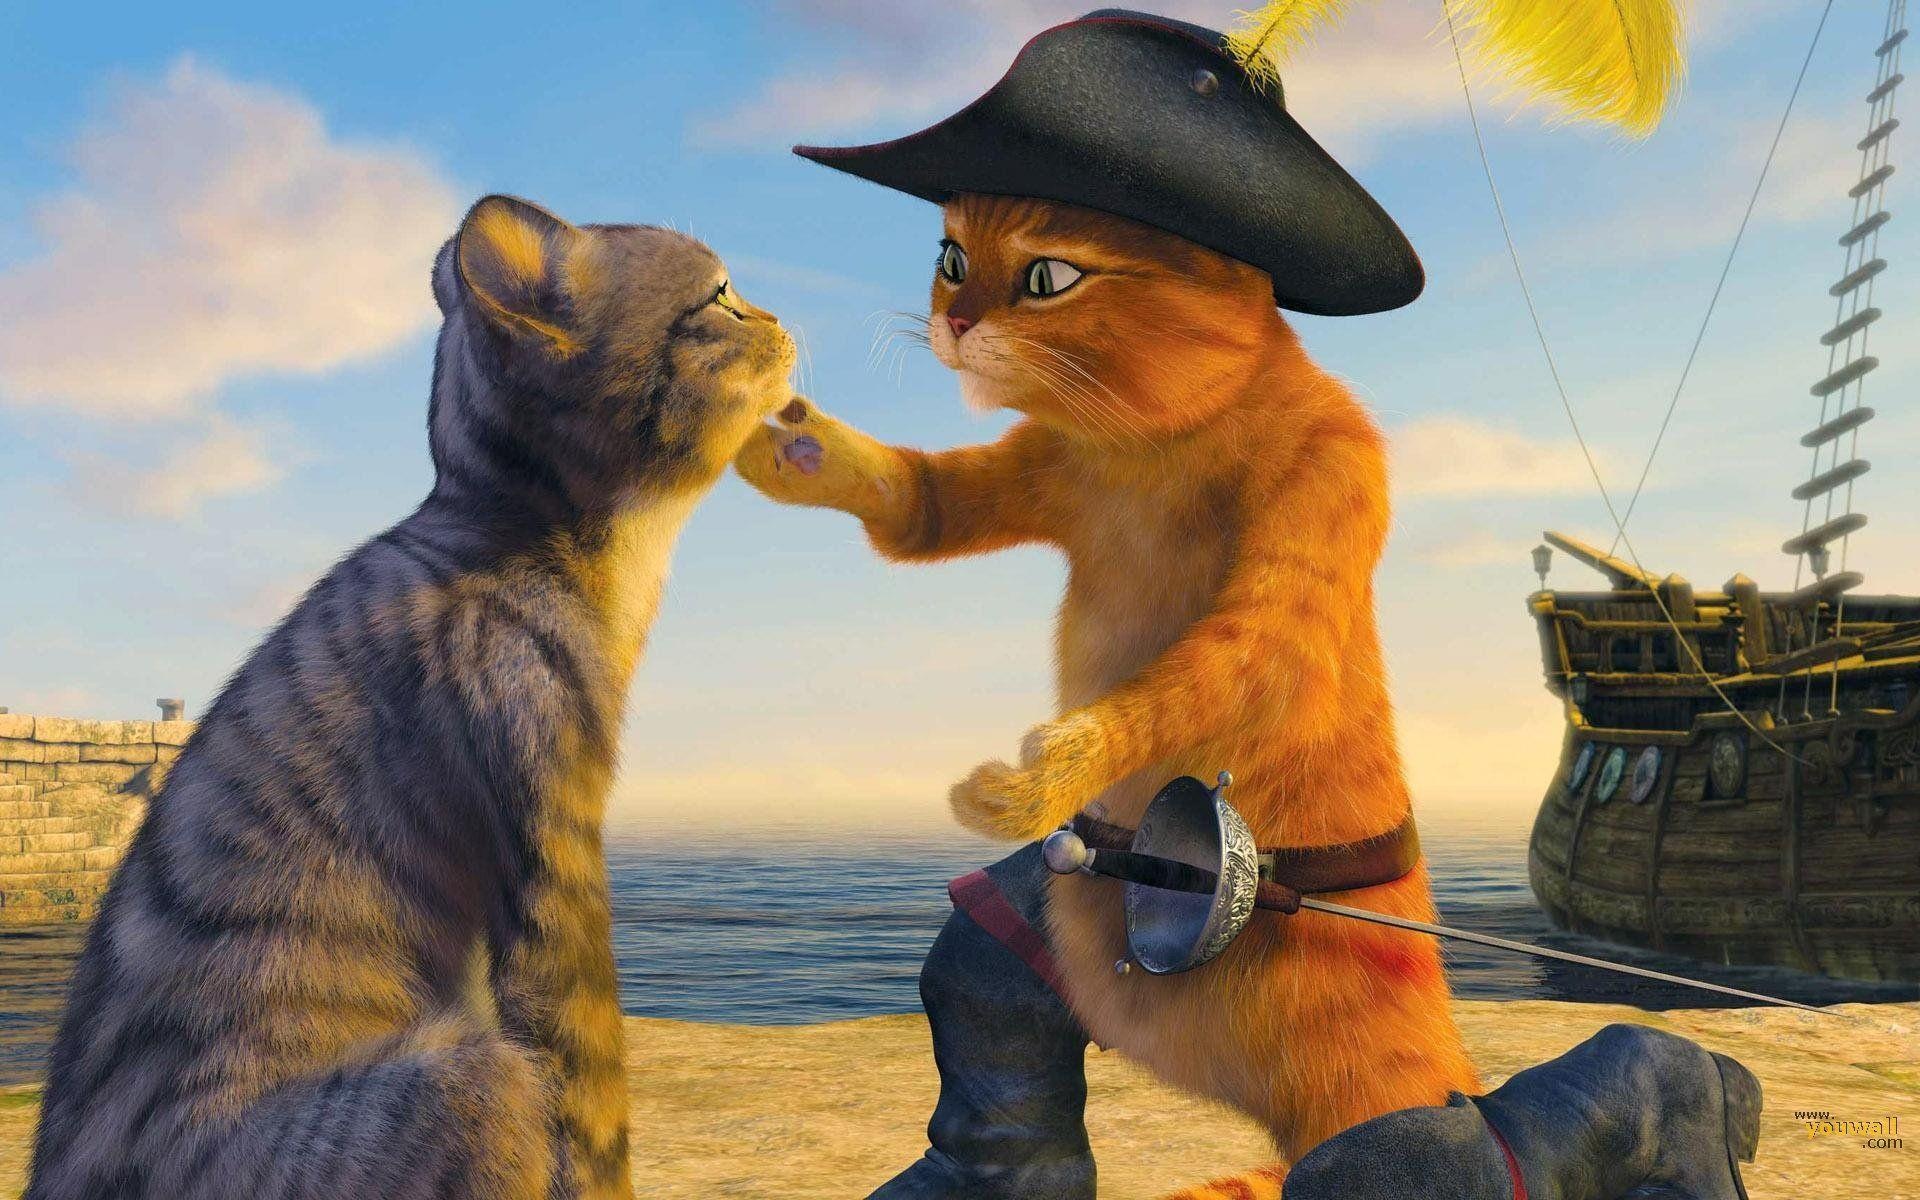 Puss in Boots, The Last Wish animation, Puss in boots wallpapers, Animated comedy, 1920x1200 HD Desktop